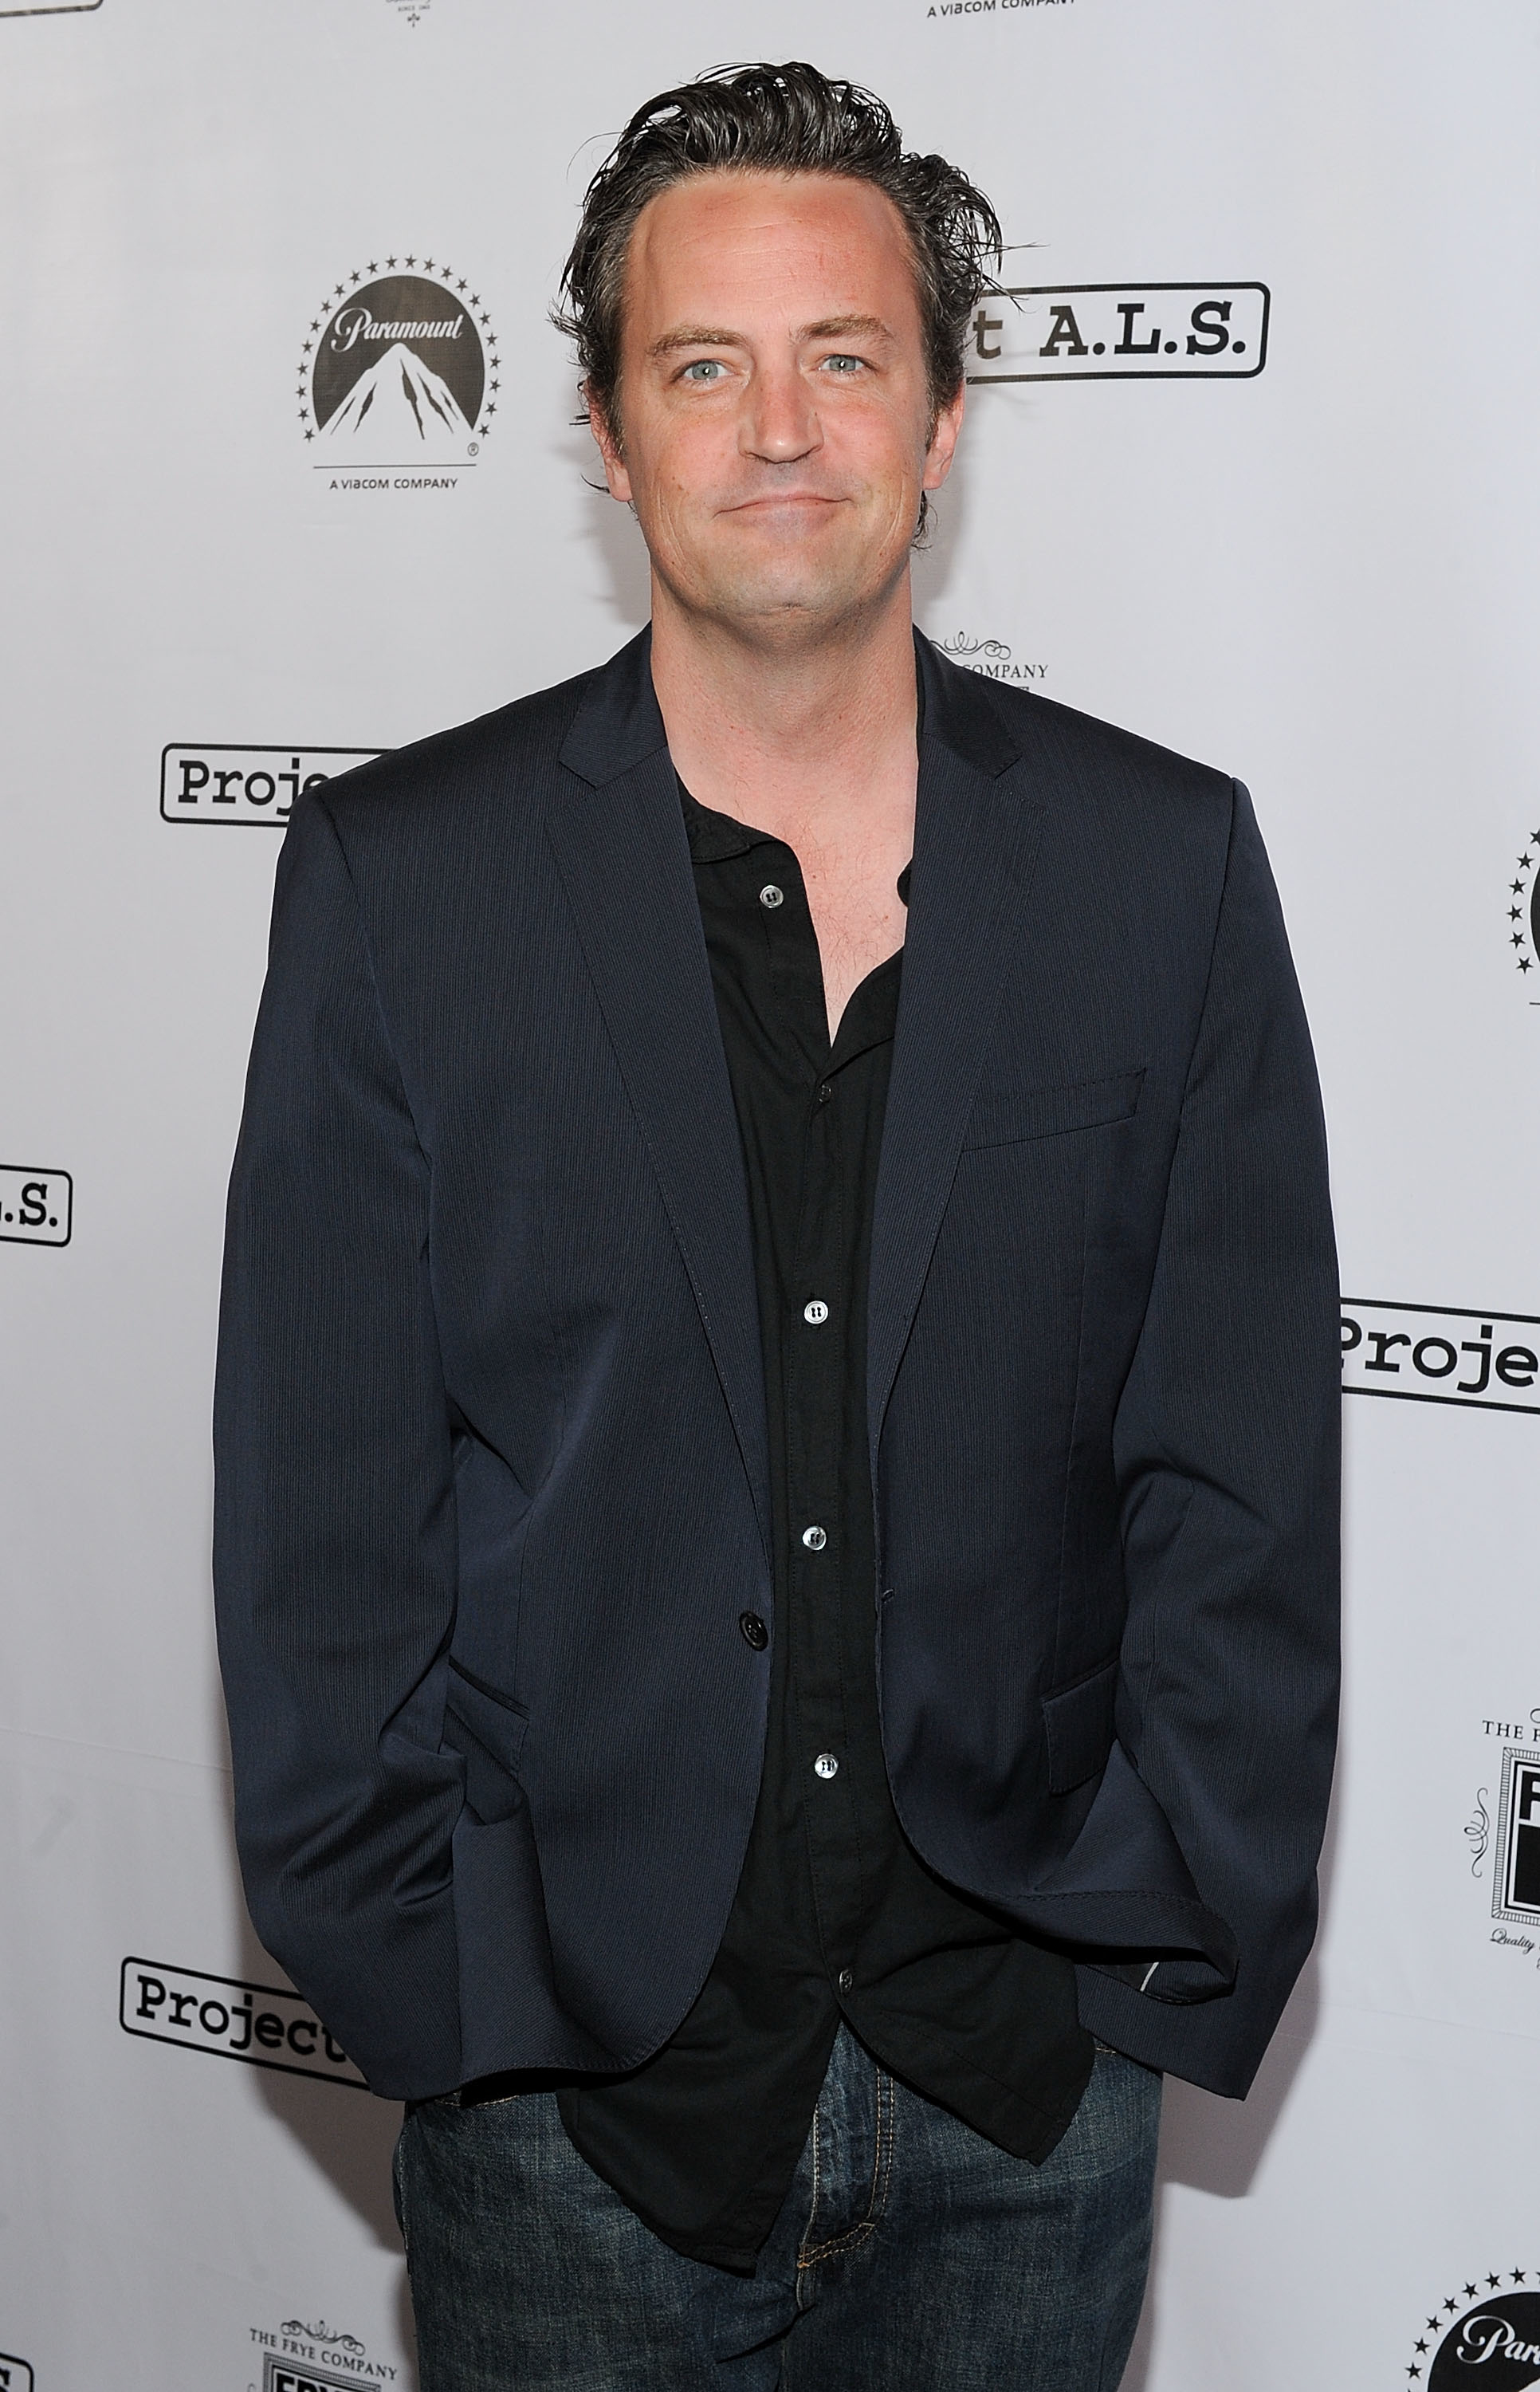 Matthew Perry stands on the red carpet wearing a dark suit with an unbuttoned shirt